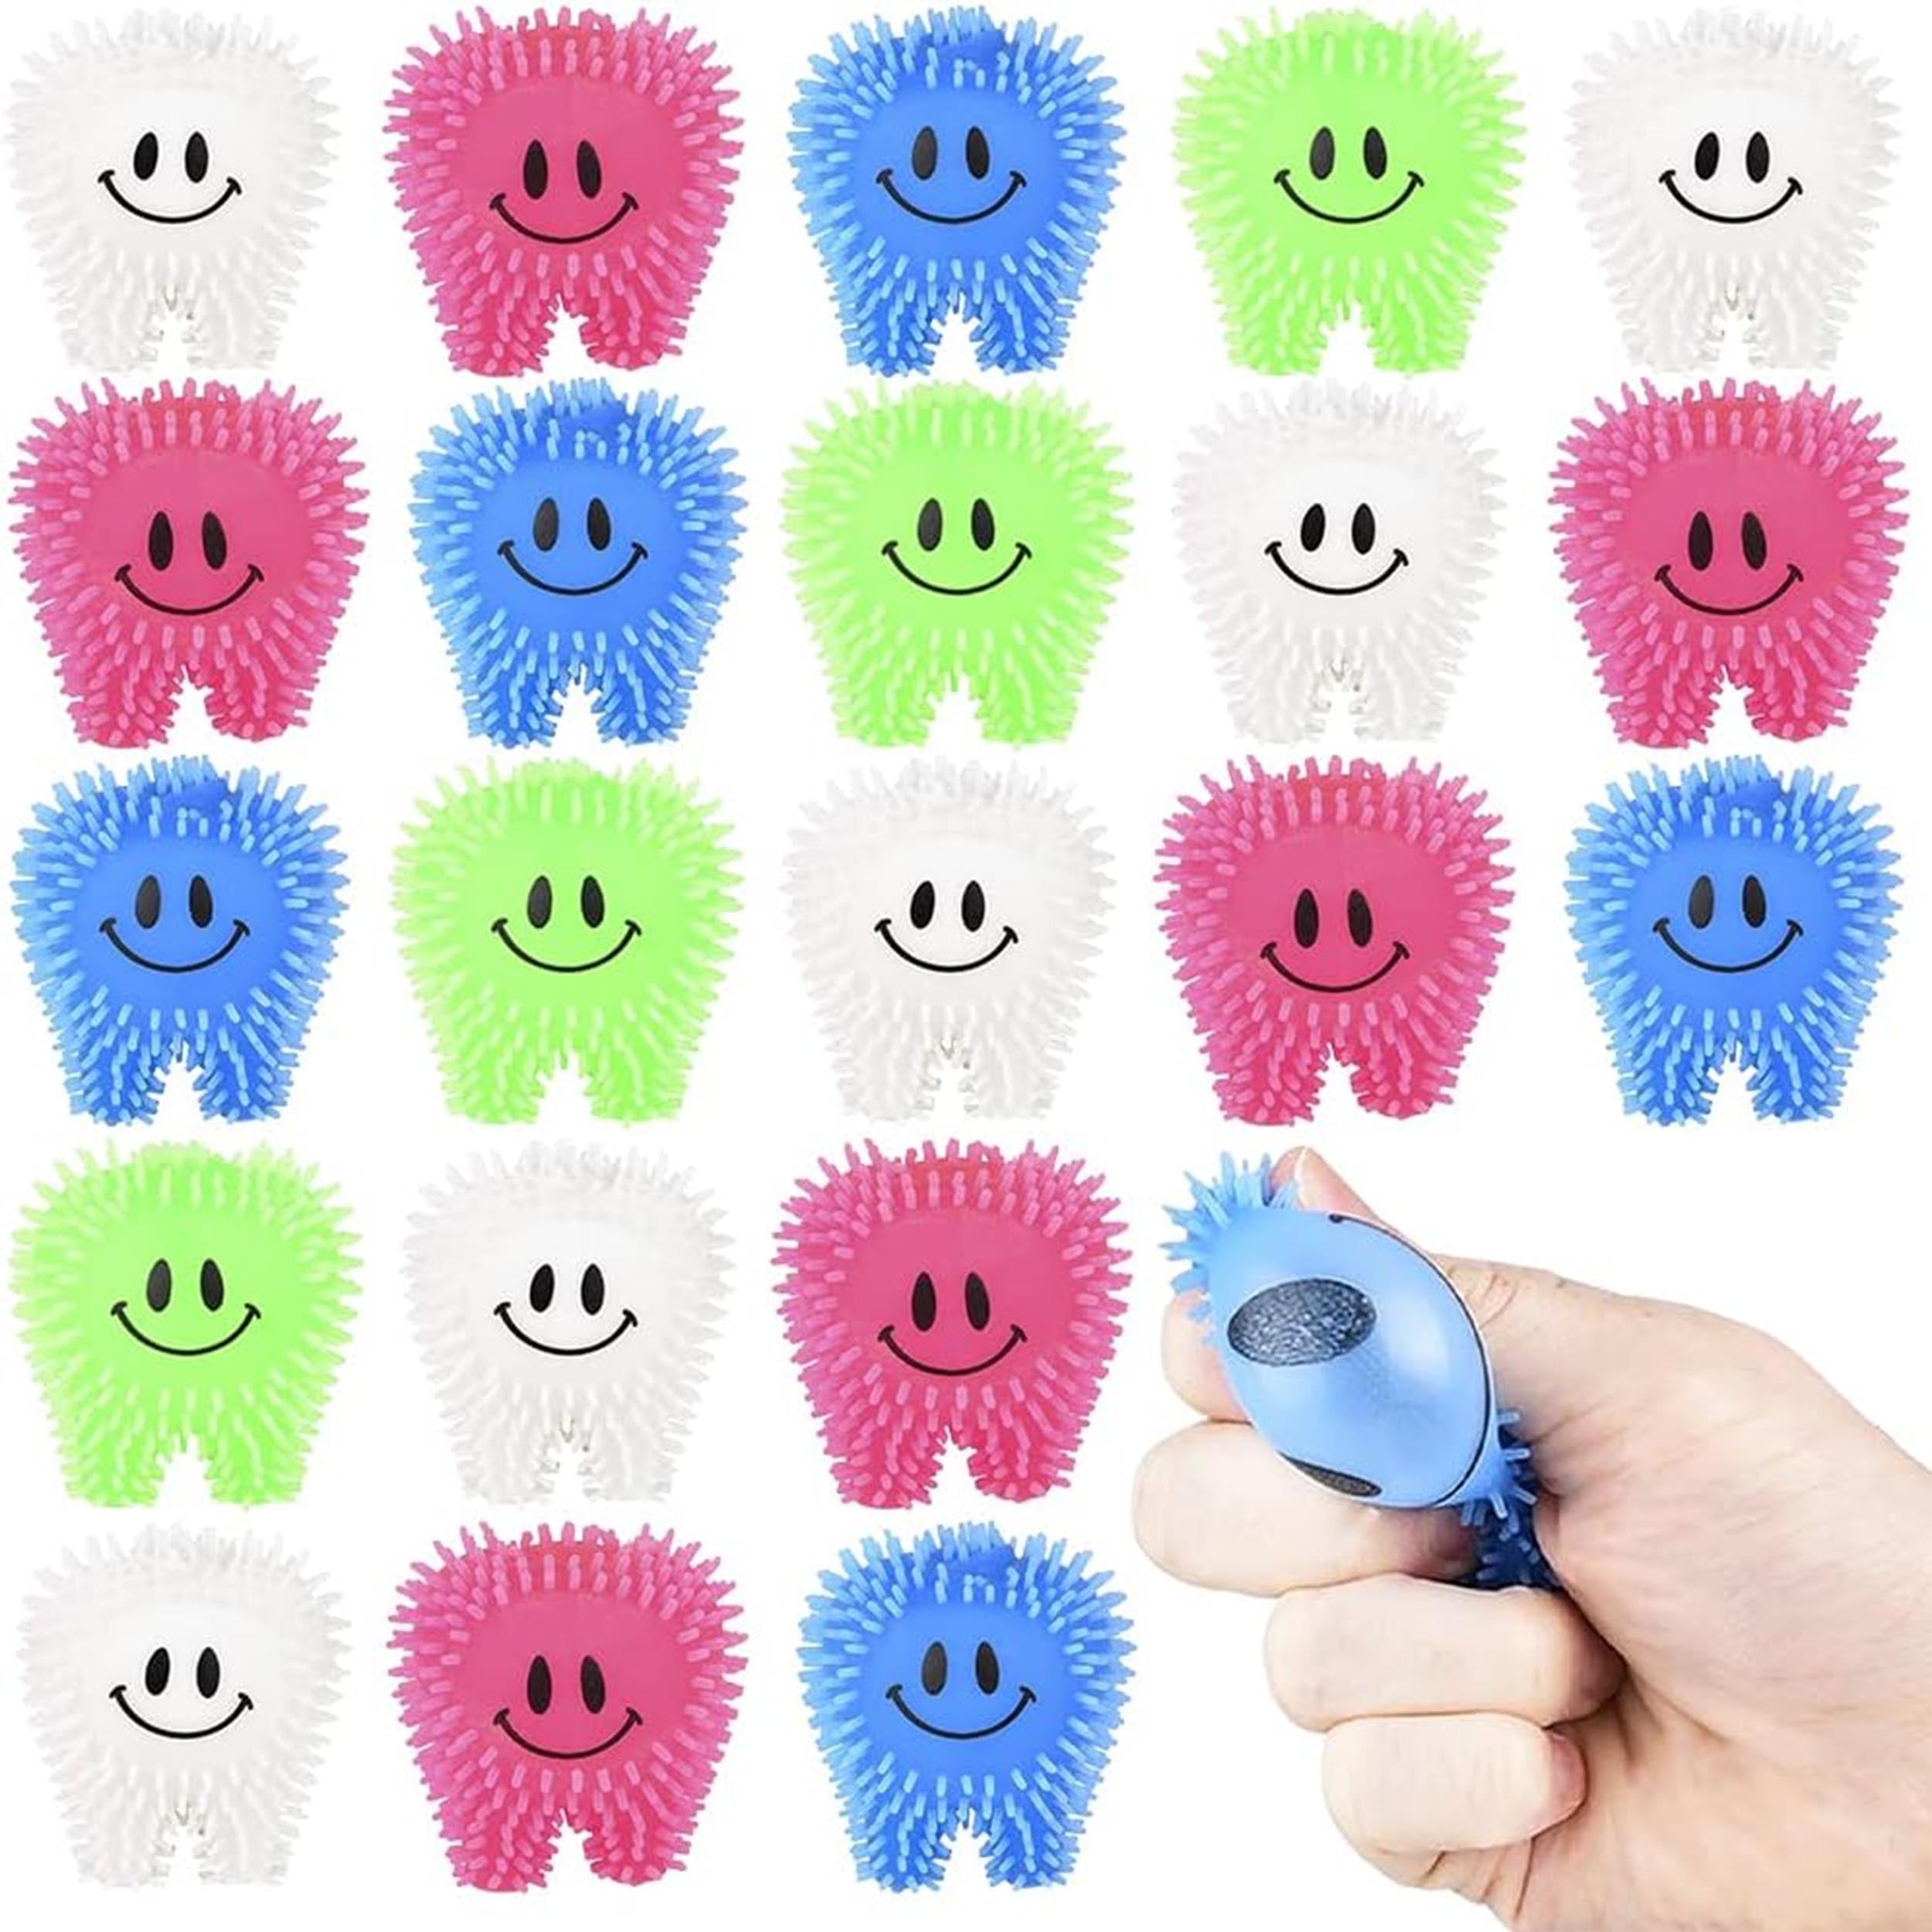 Mini Tooth Puffers Soft Spike Squeezy Toys for Kids Stress Relief Sensory Fidget Toys Goodie Bag Stuffers Assorted Colors (MOQ-24)